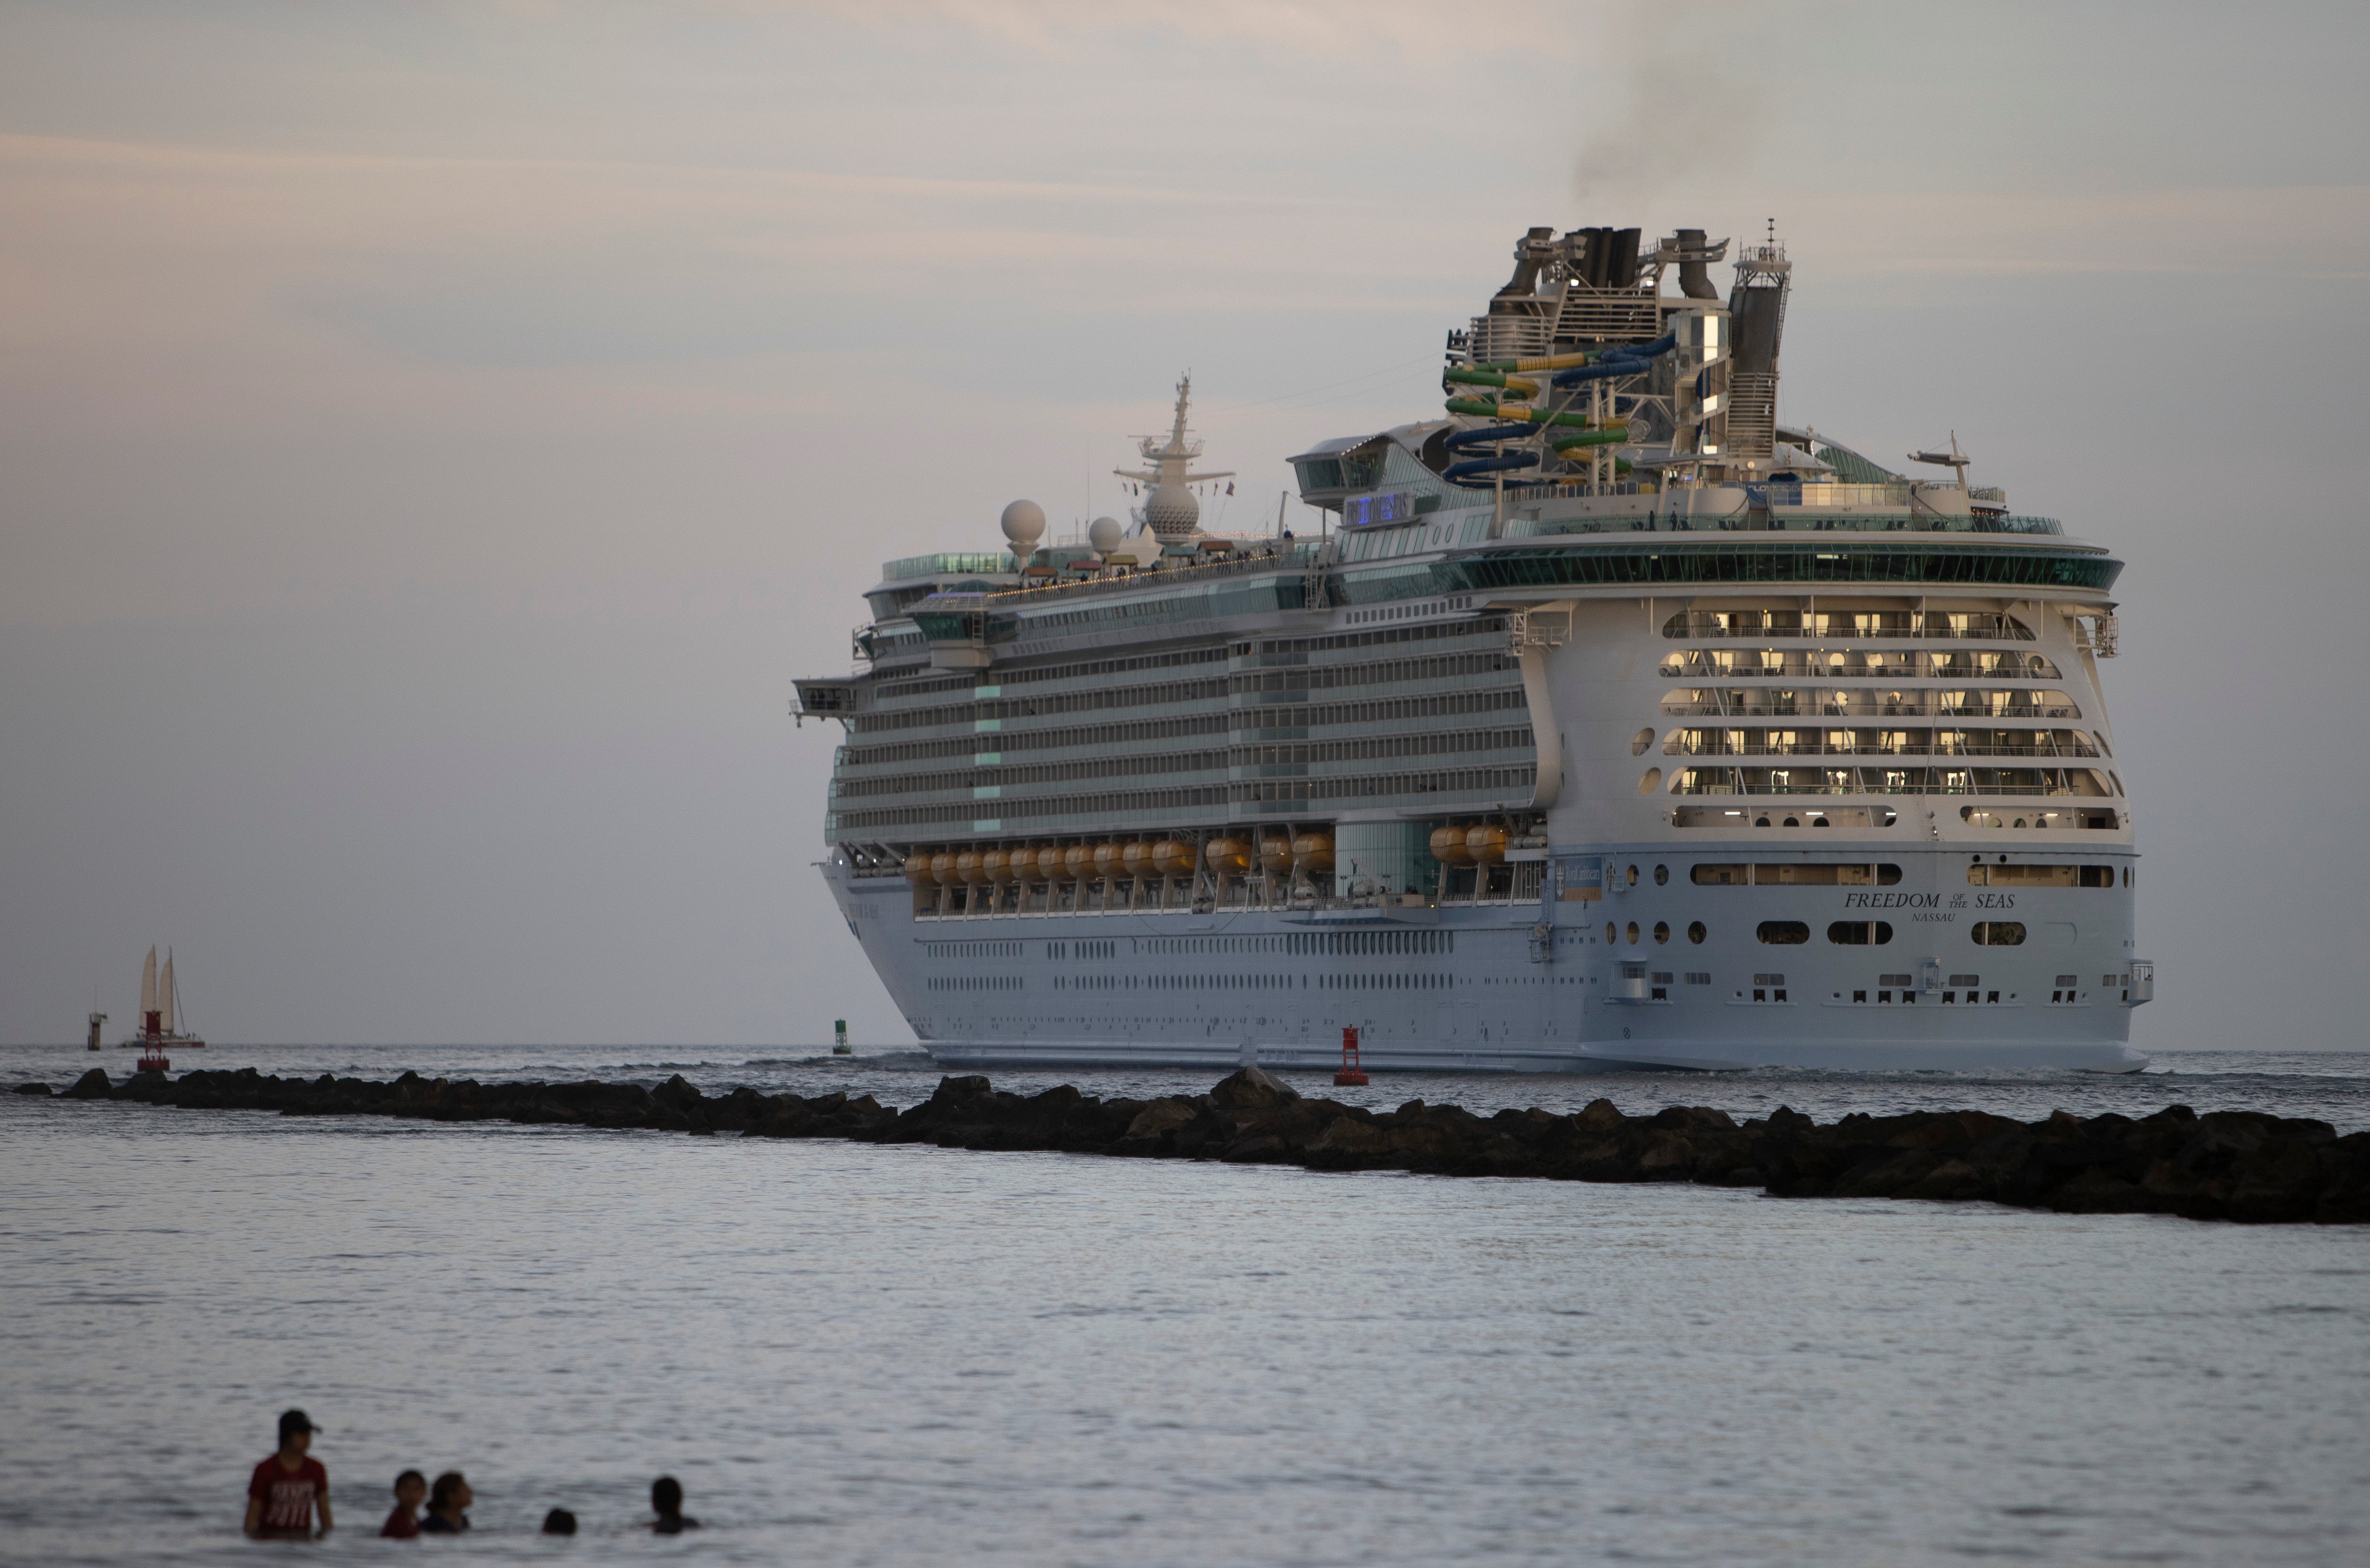 Cruise-goers unaware of harmful impact of unregulated industry on marine life and human health The Independent pic photo